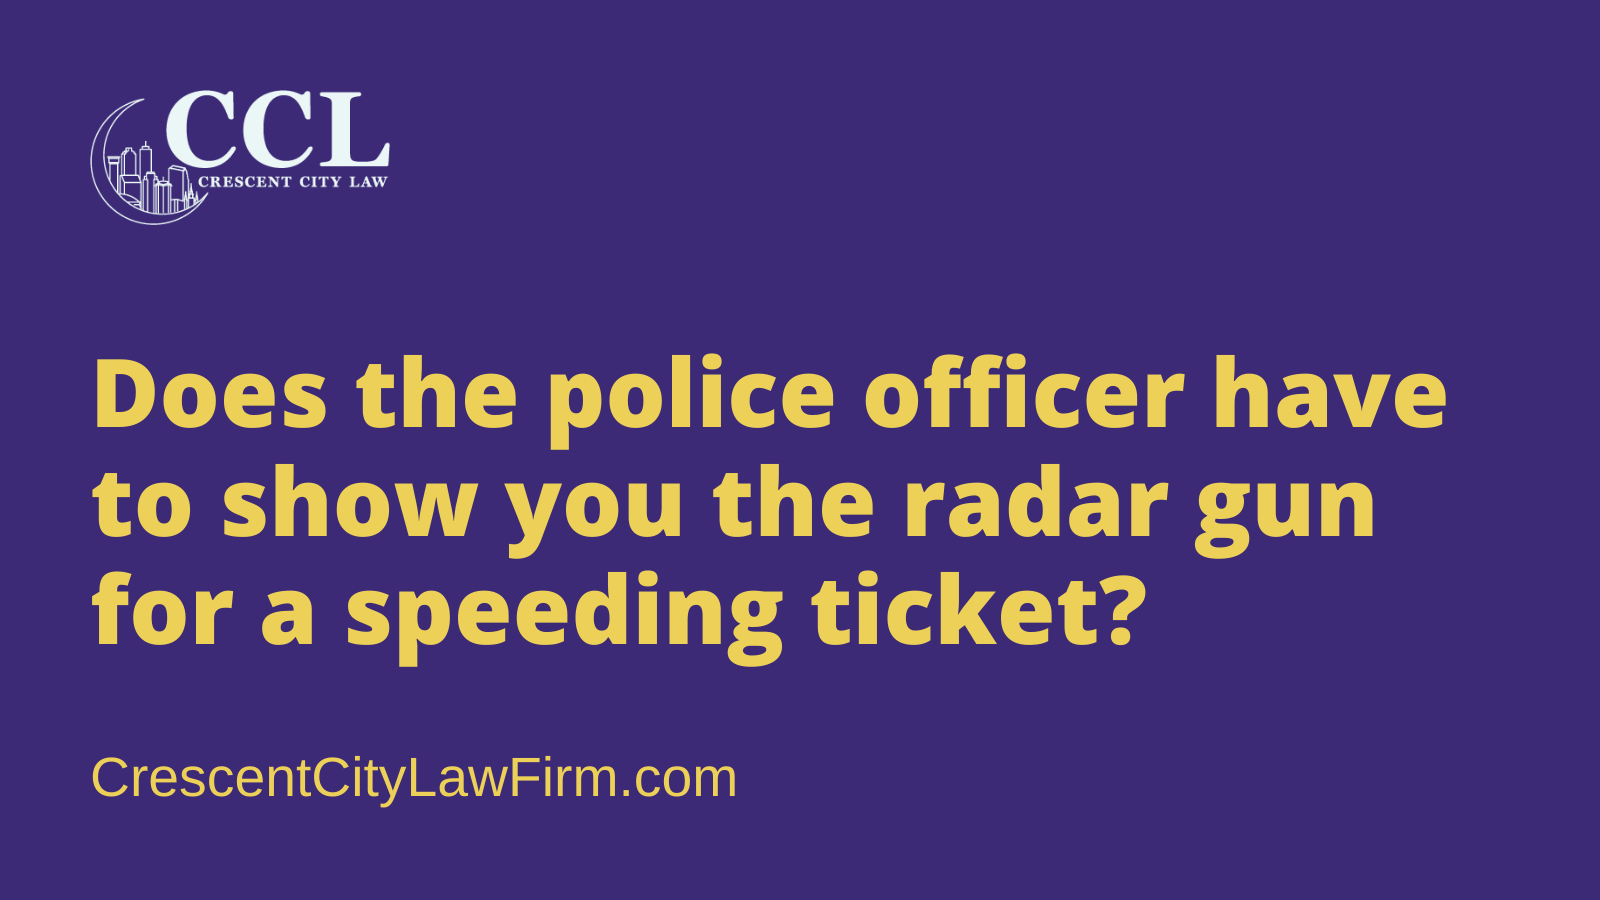 Does the police officer have to show you the radar gun for a speeding ticket - crescent city law firm - new orleans la